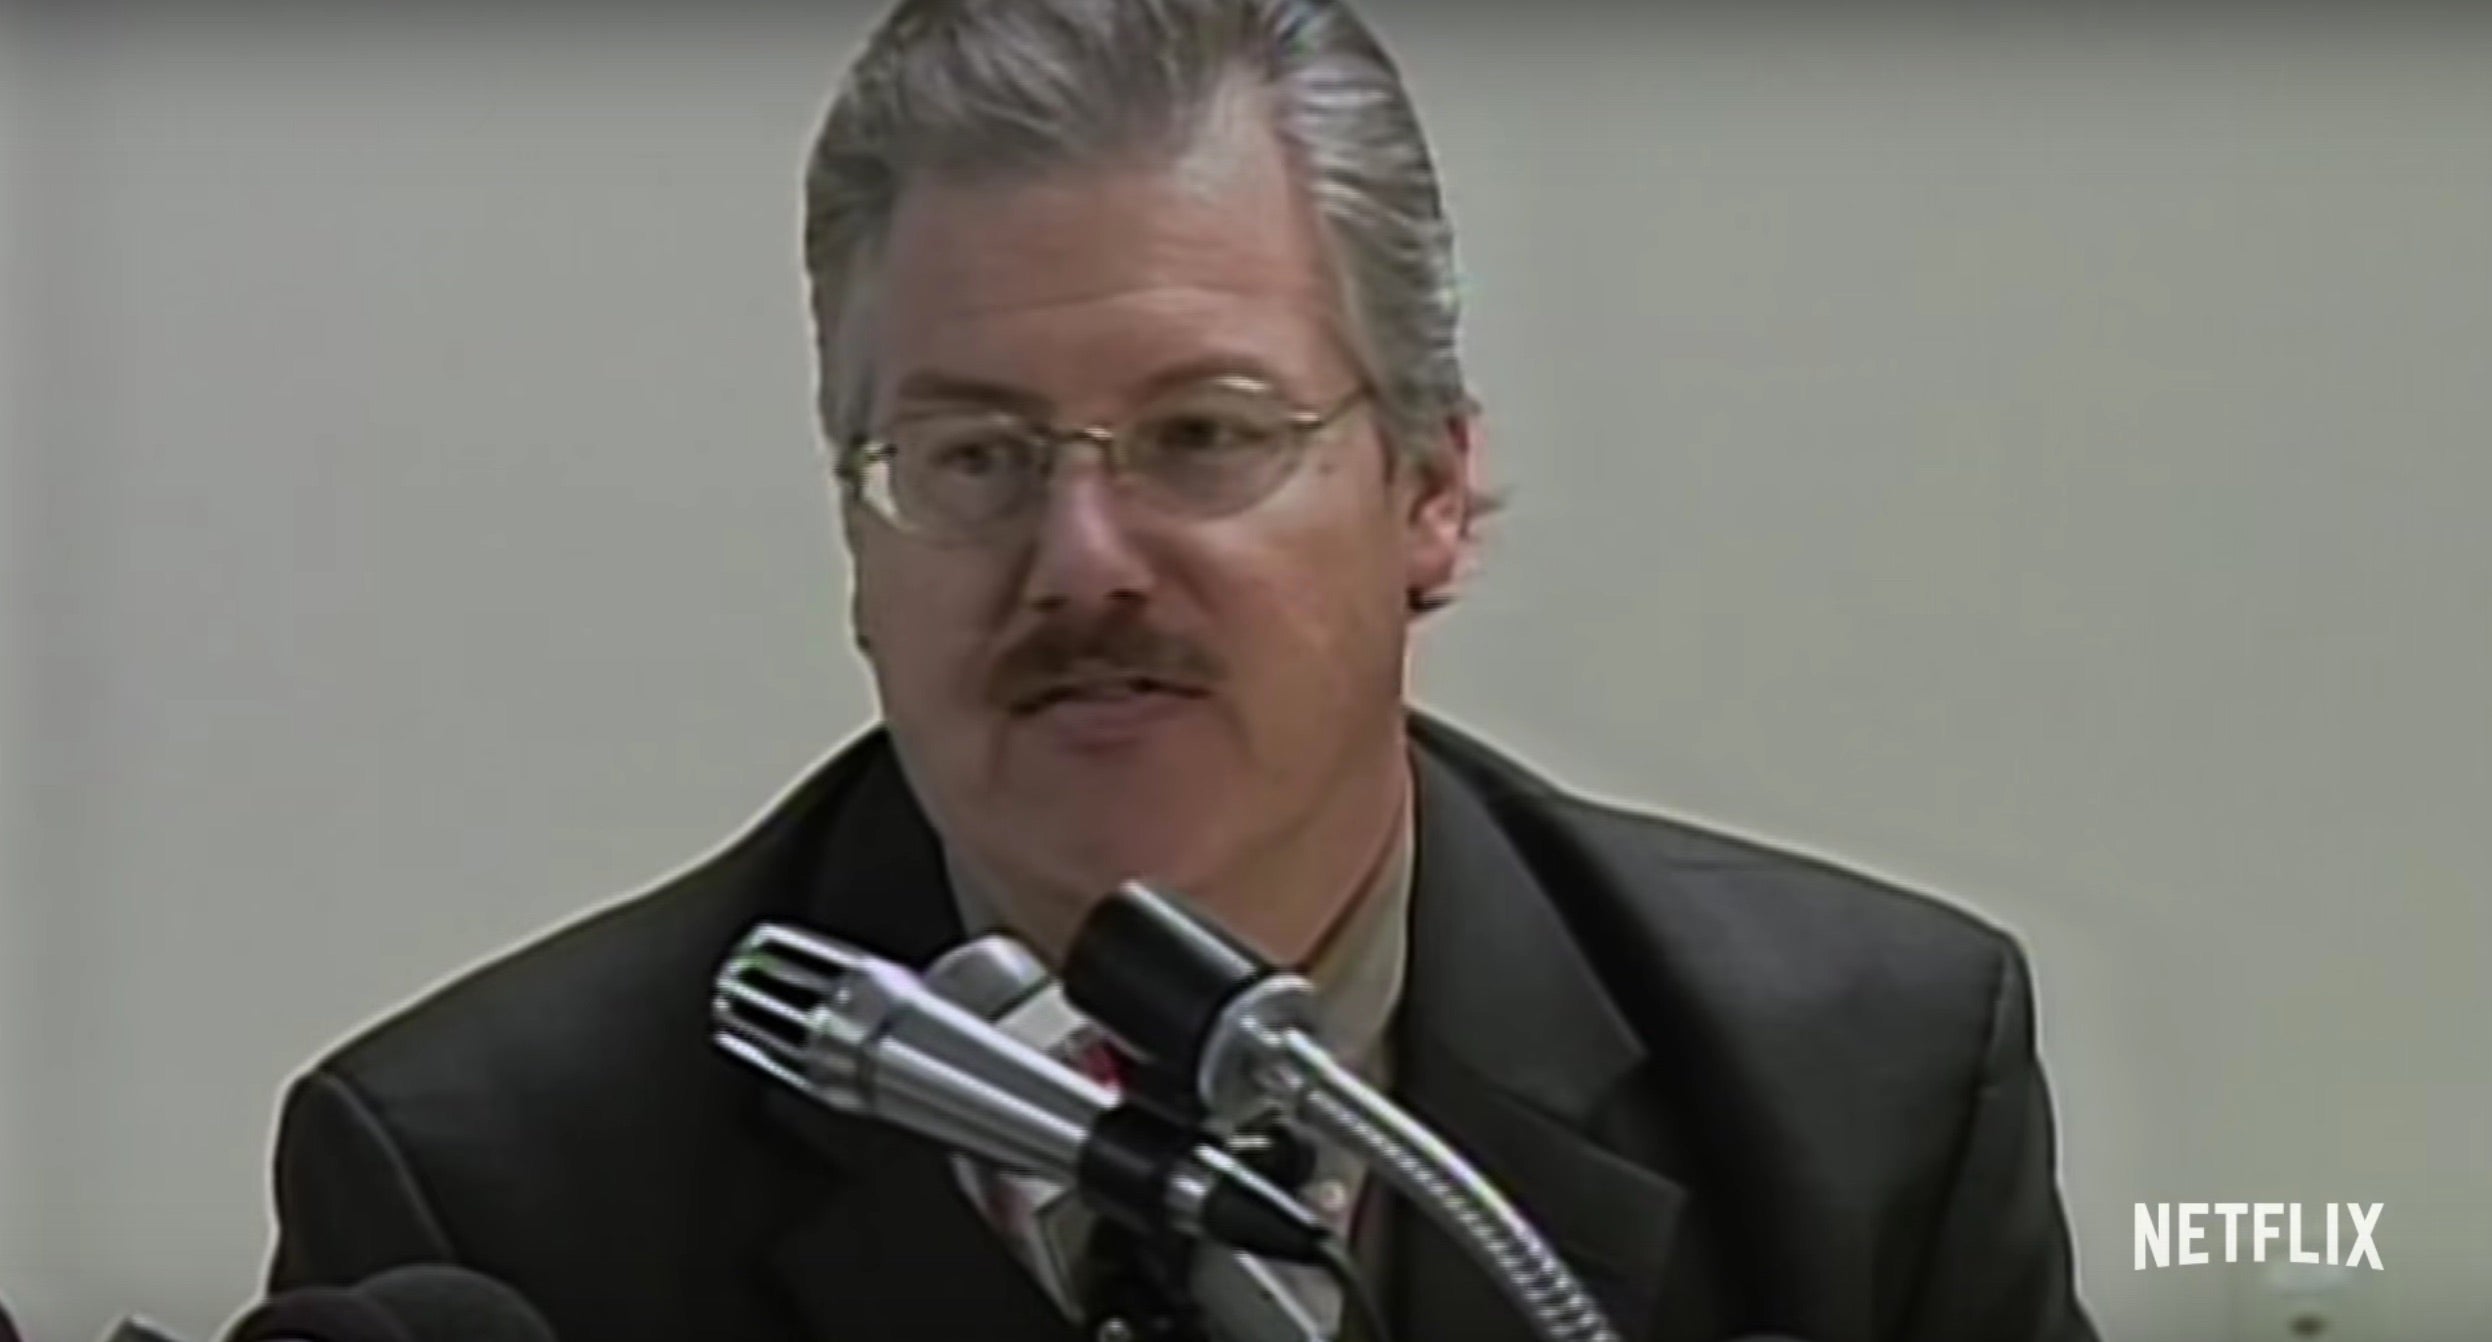 District attorney Ken Kratz receives negative reviews on his Yelp page following Netflix's 'Making of a Murderer'